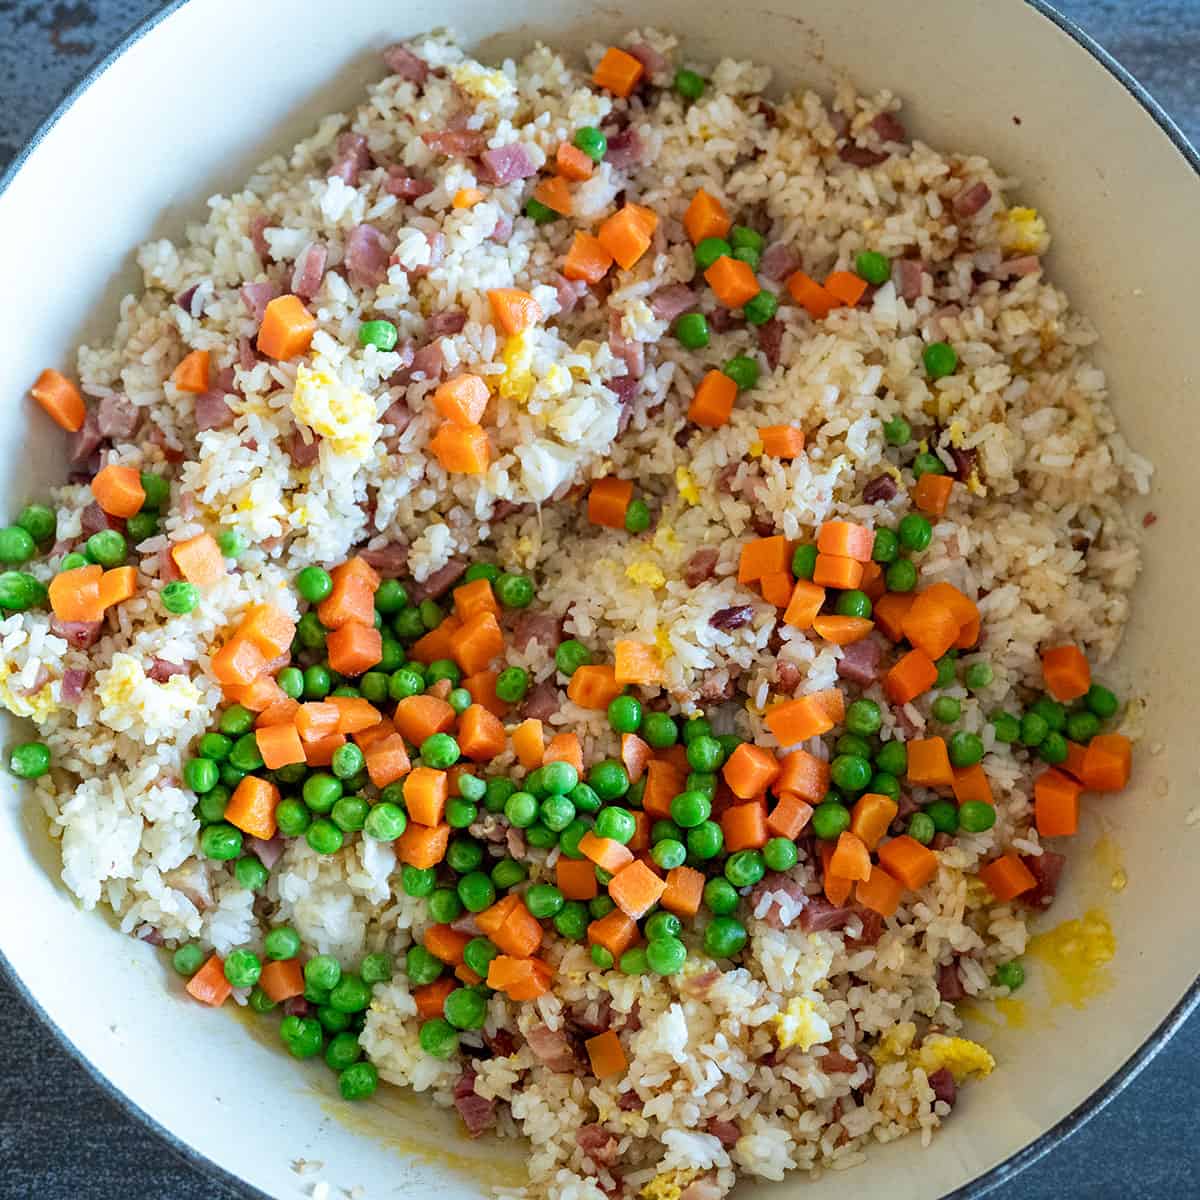 Peas and carrots added to fried rice.